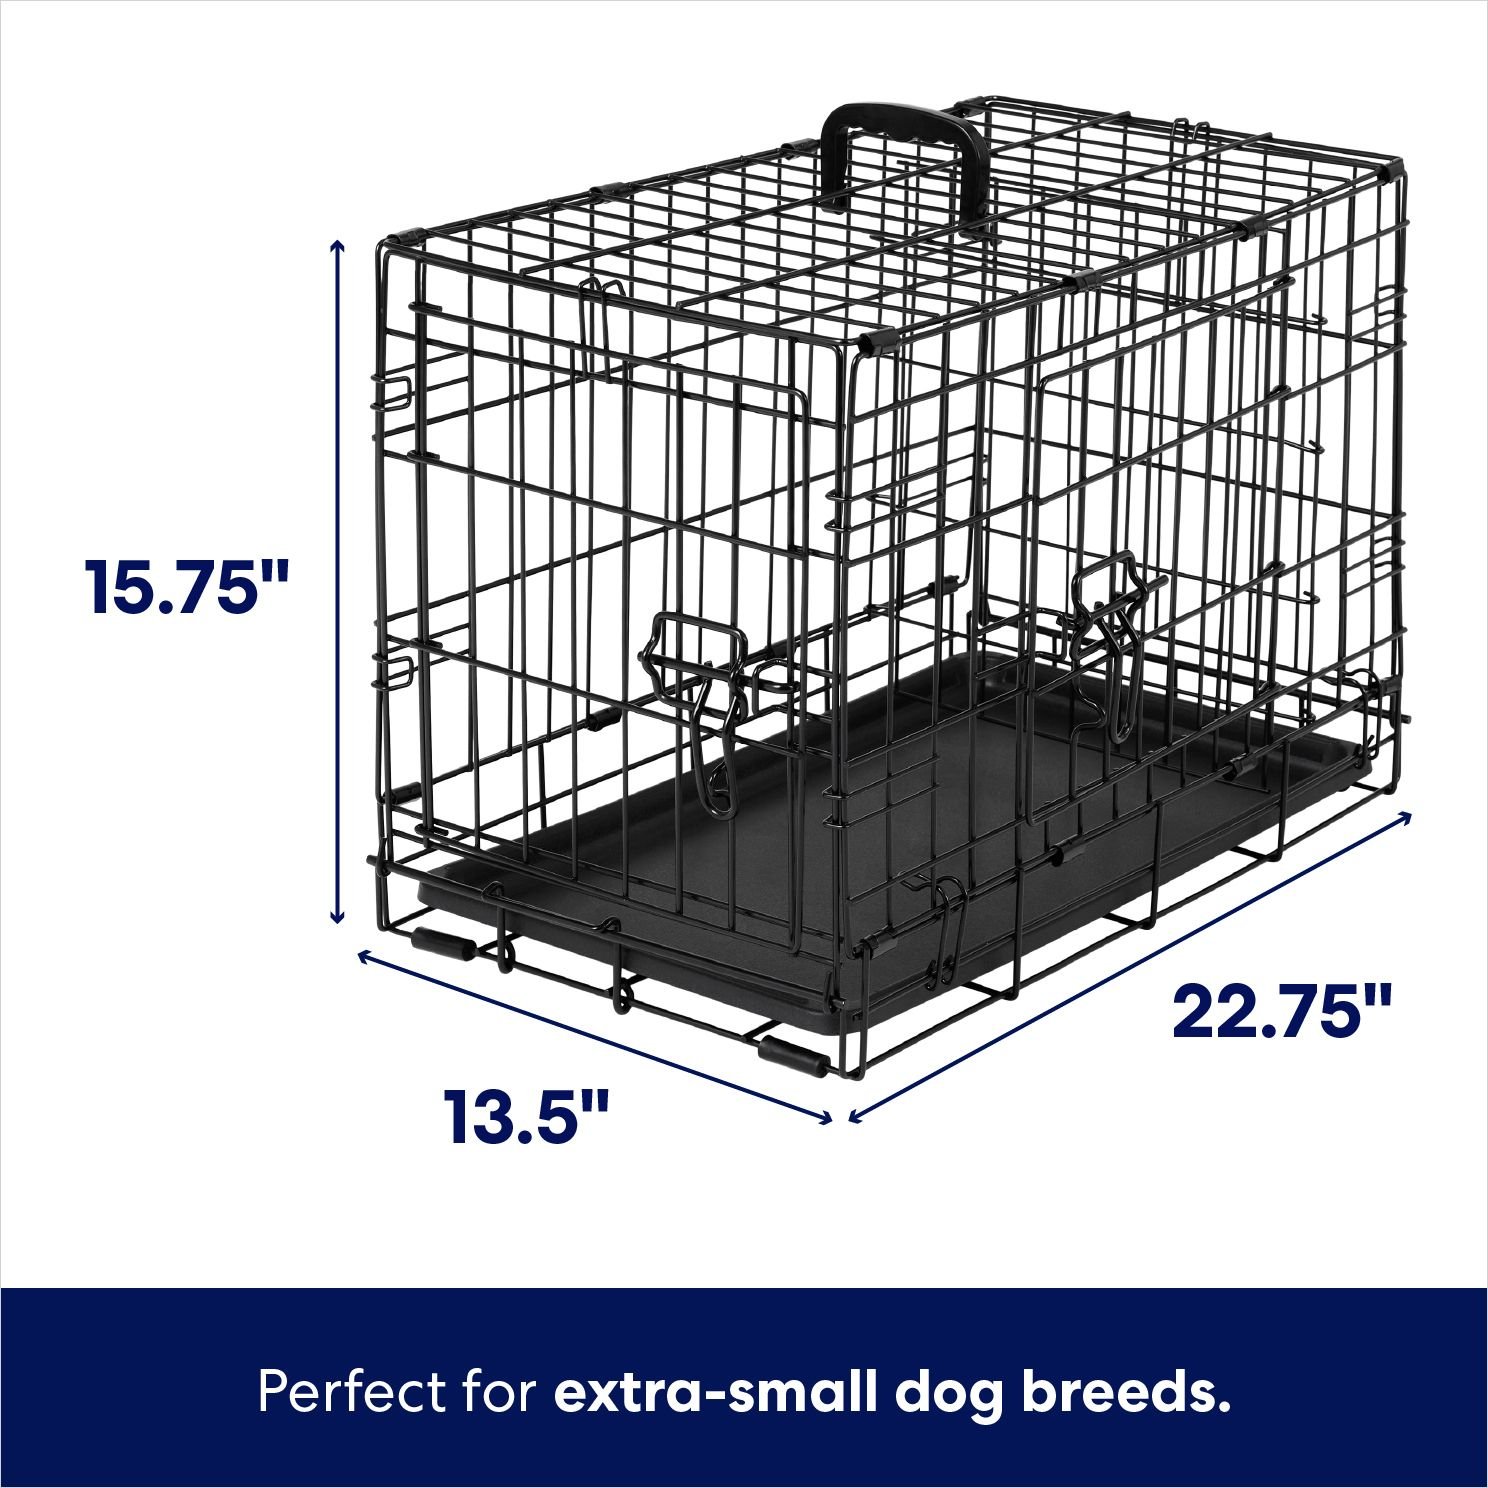 42 inch dog crate measurements